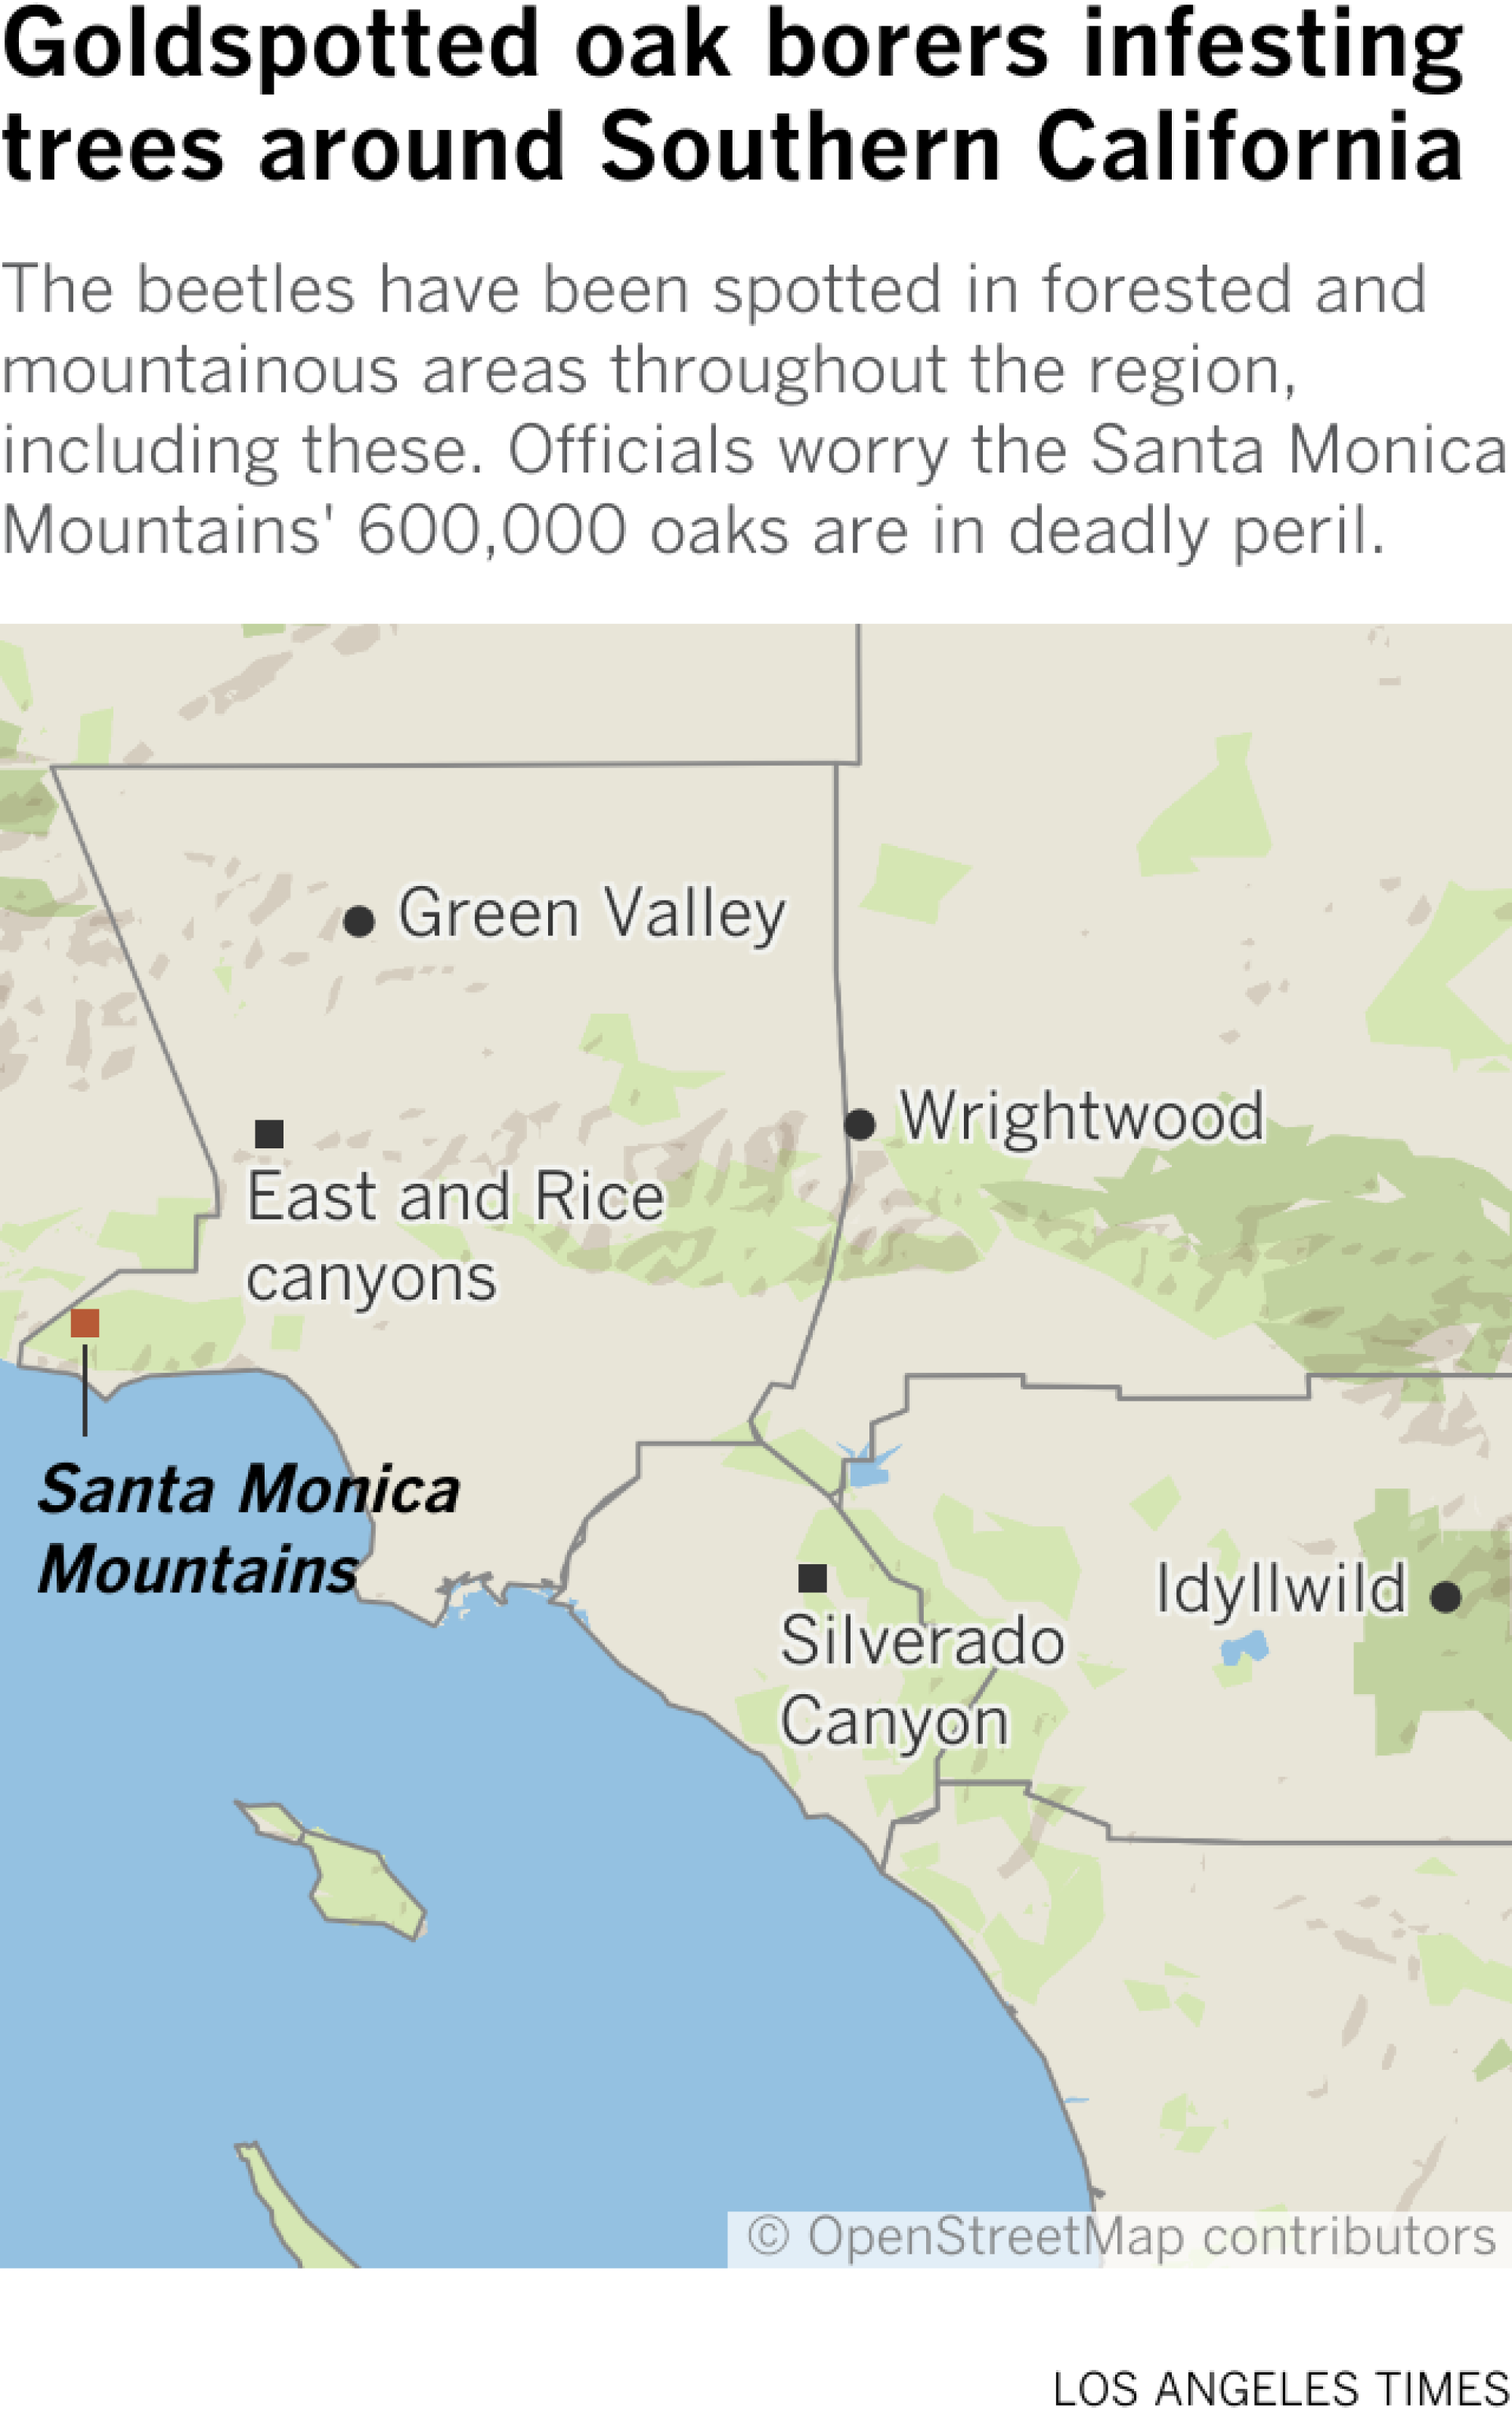 Map shows areas with known infestations of goldspotted oak borers in Southern California, including Green Valley, East Canyon, Rice Canyon, Wrightwood, Idyllwild and Oak Canyon